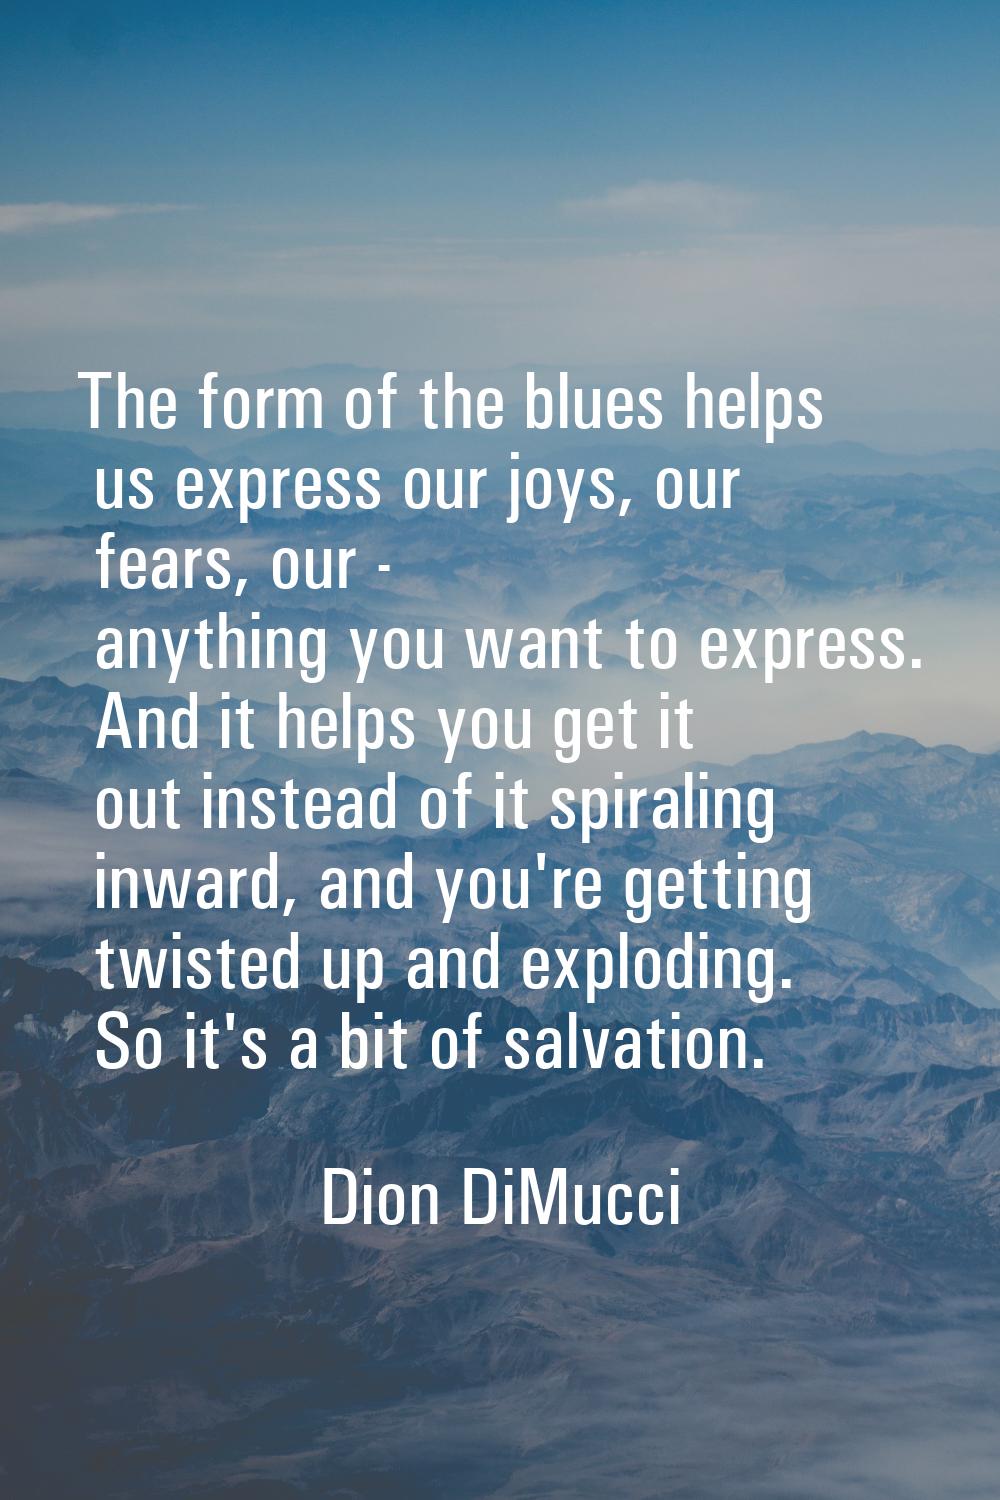 The form of the blues helps us express our joys, our fears, our - anything you want to express. And